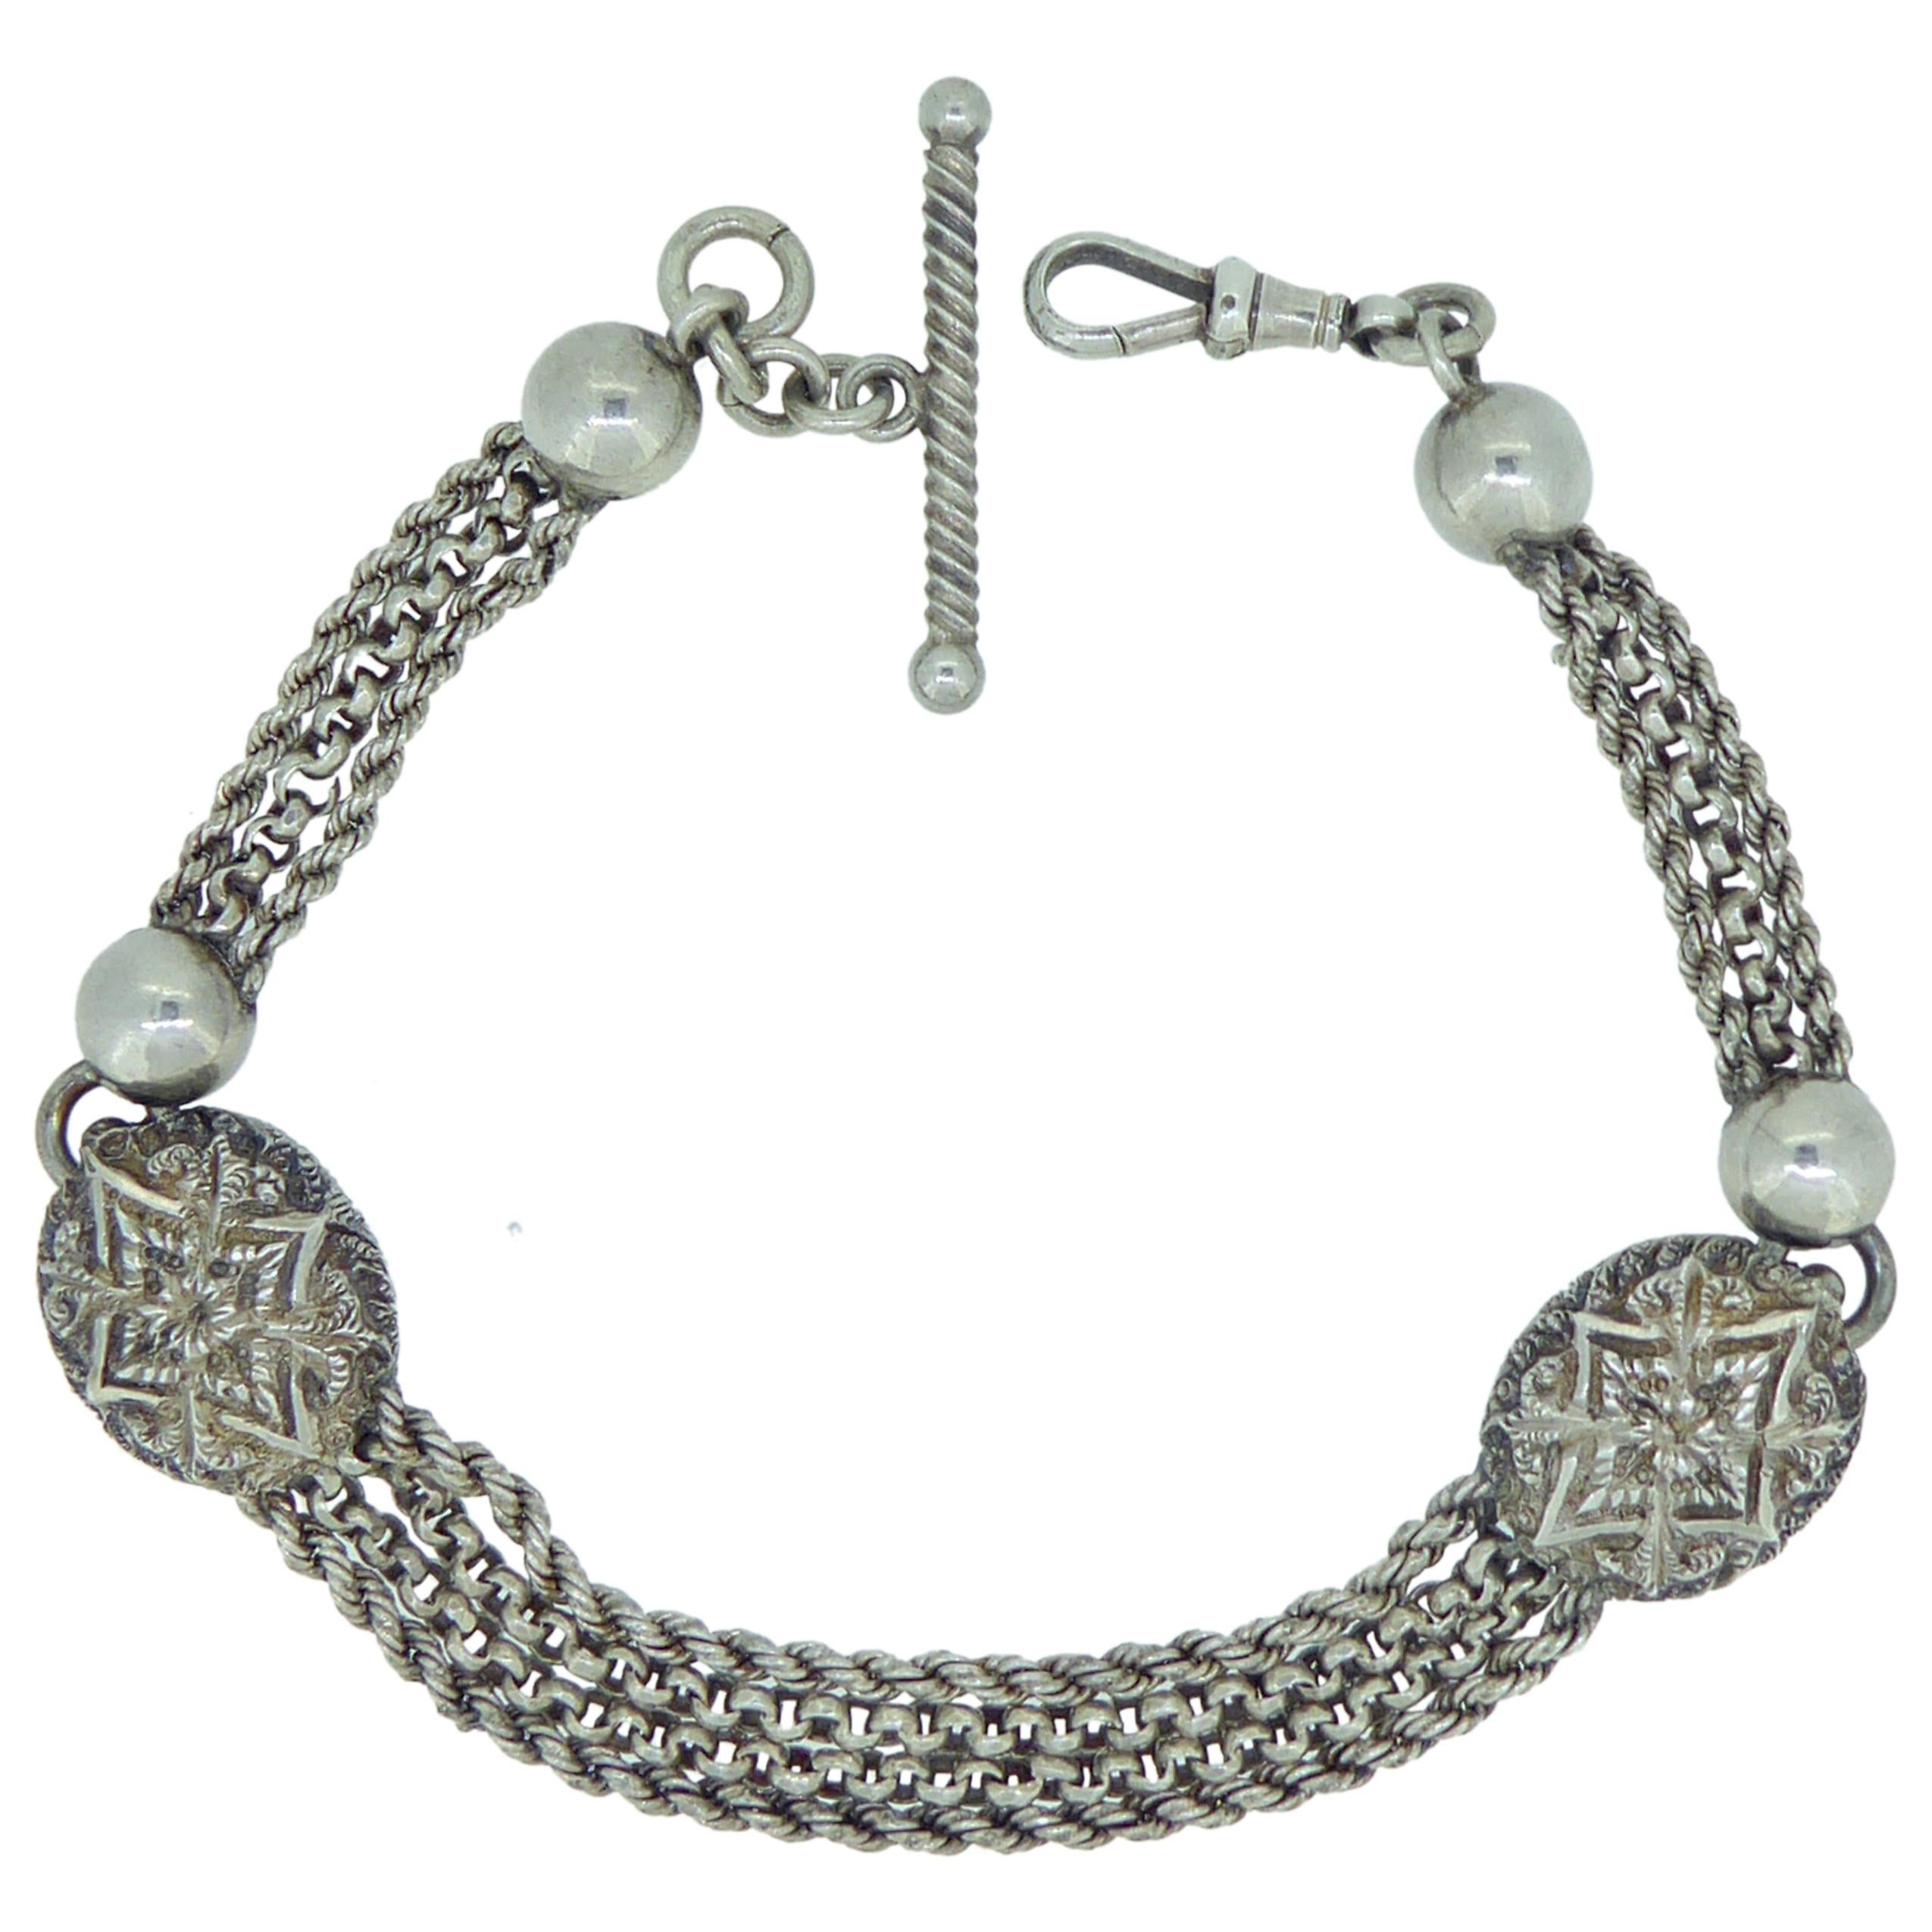 Antique Victorian Silver Bracelet Large Chased Oval Links, Toggle Bar and Swivel